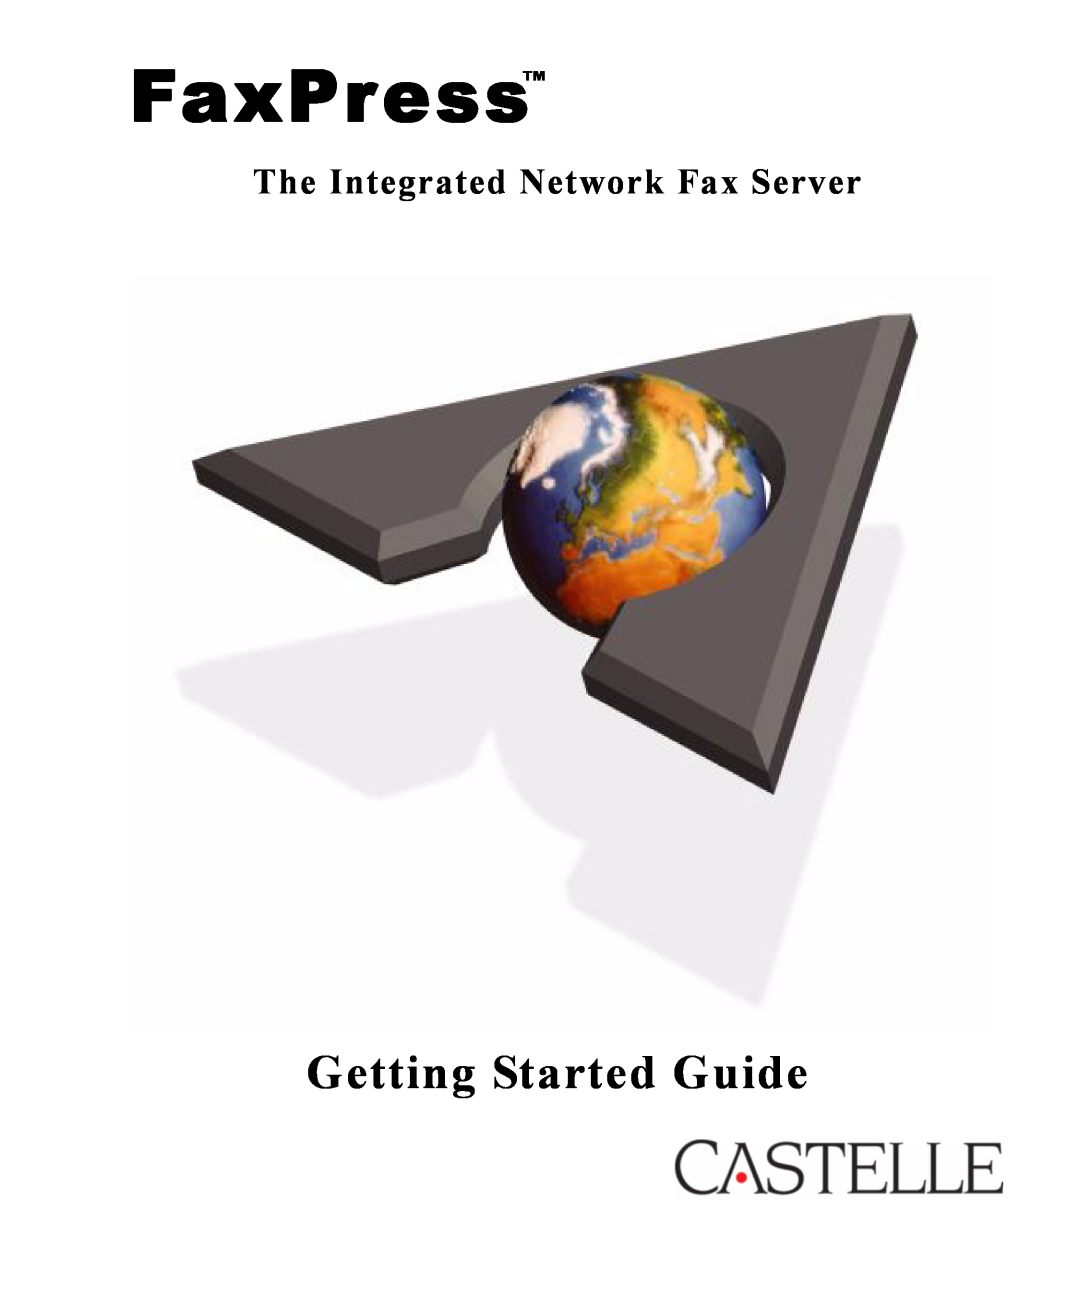 Castelle FaxPress manual Getting Started Guide, The Integrated Network Fax Server 